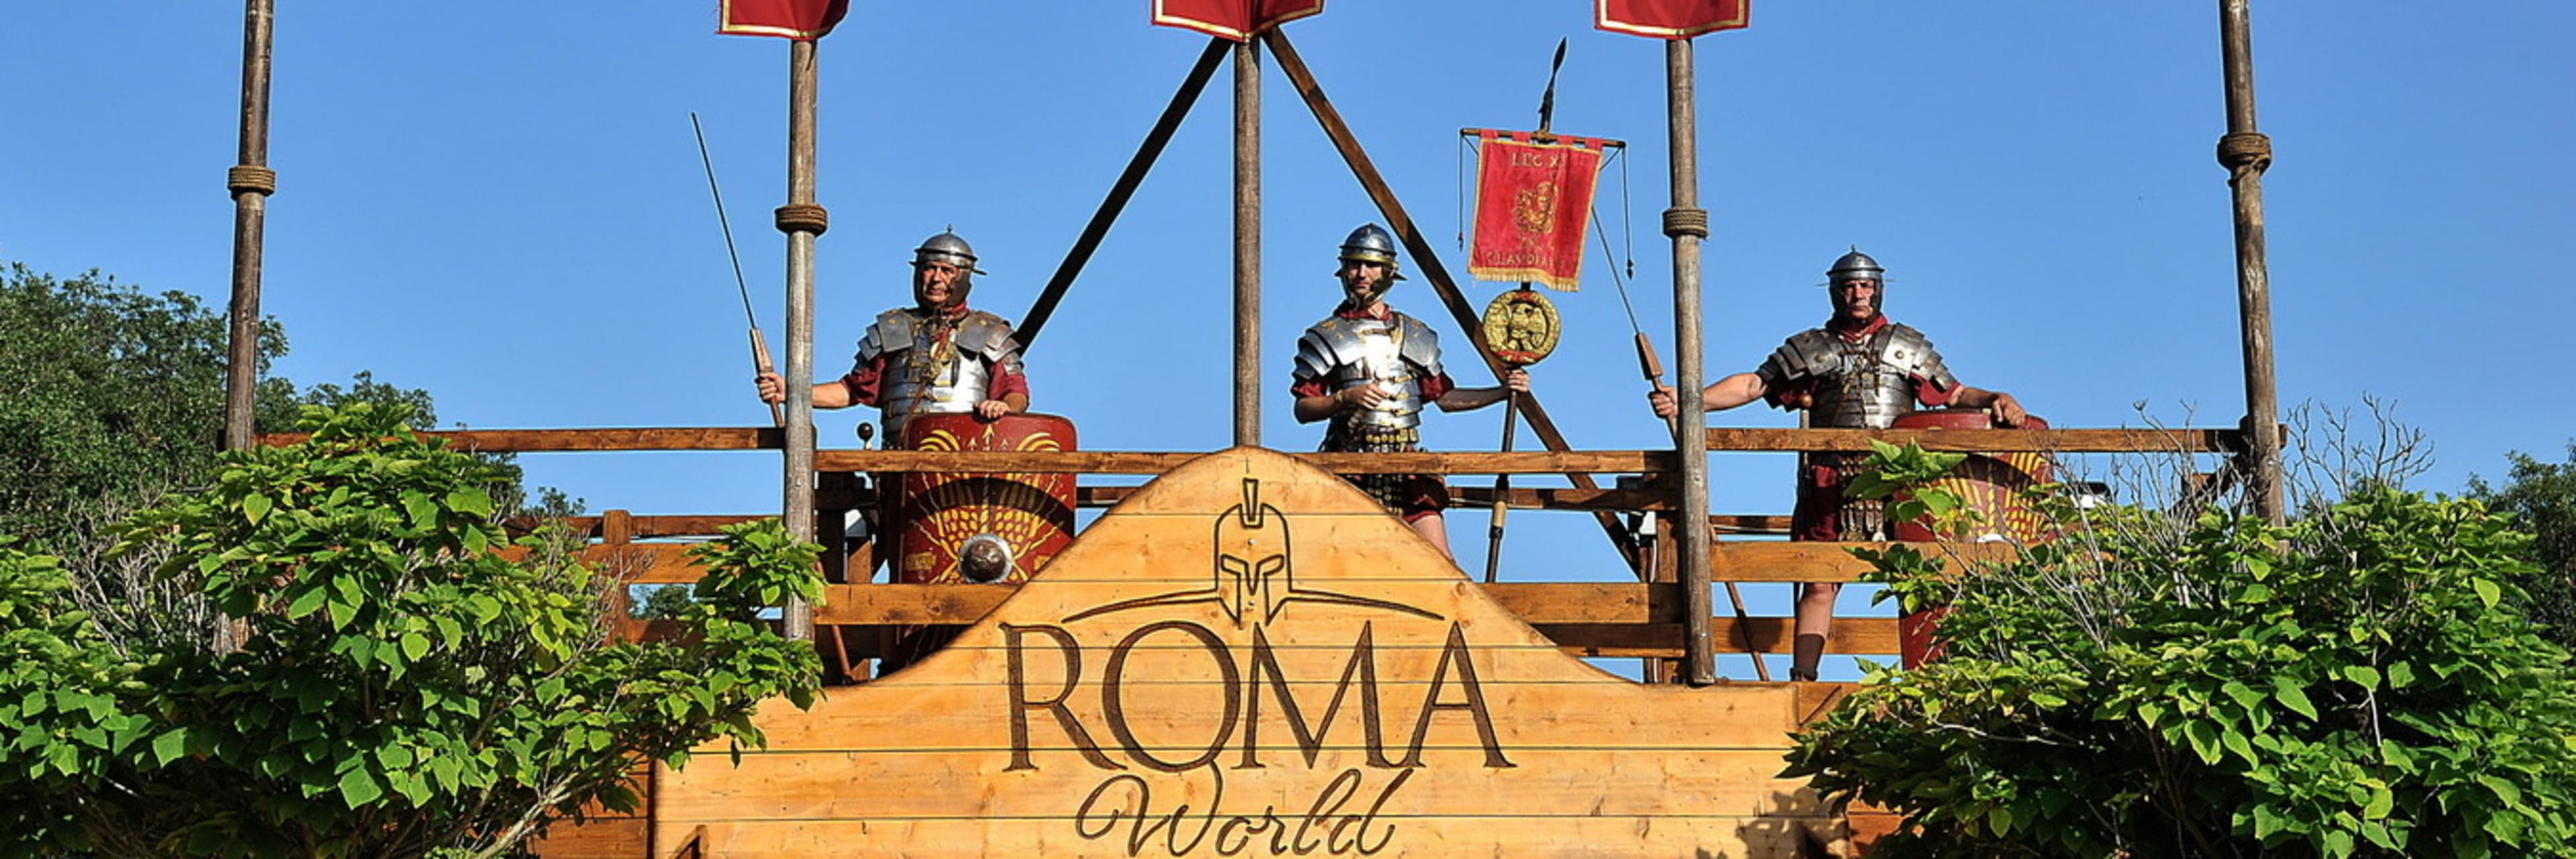 Ancient Roman guards stand sentry at the entrance to Roma World.